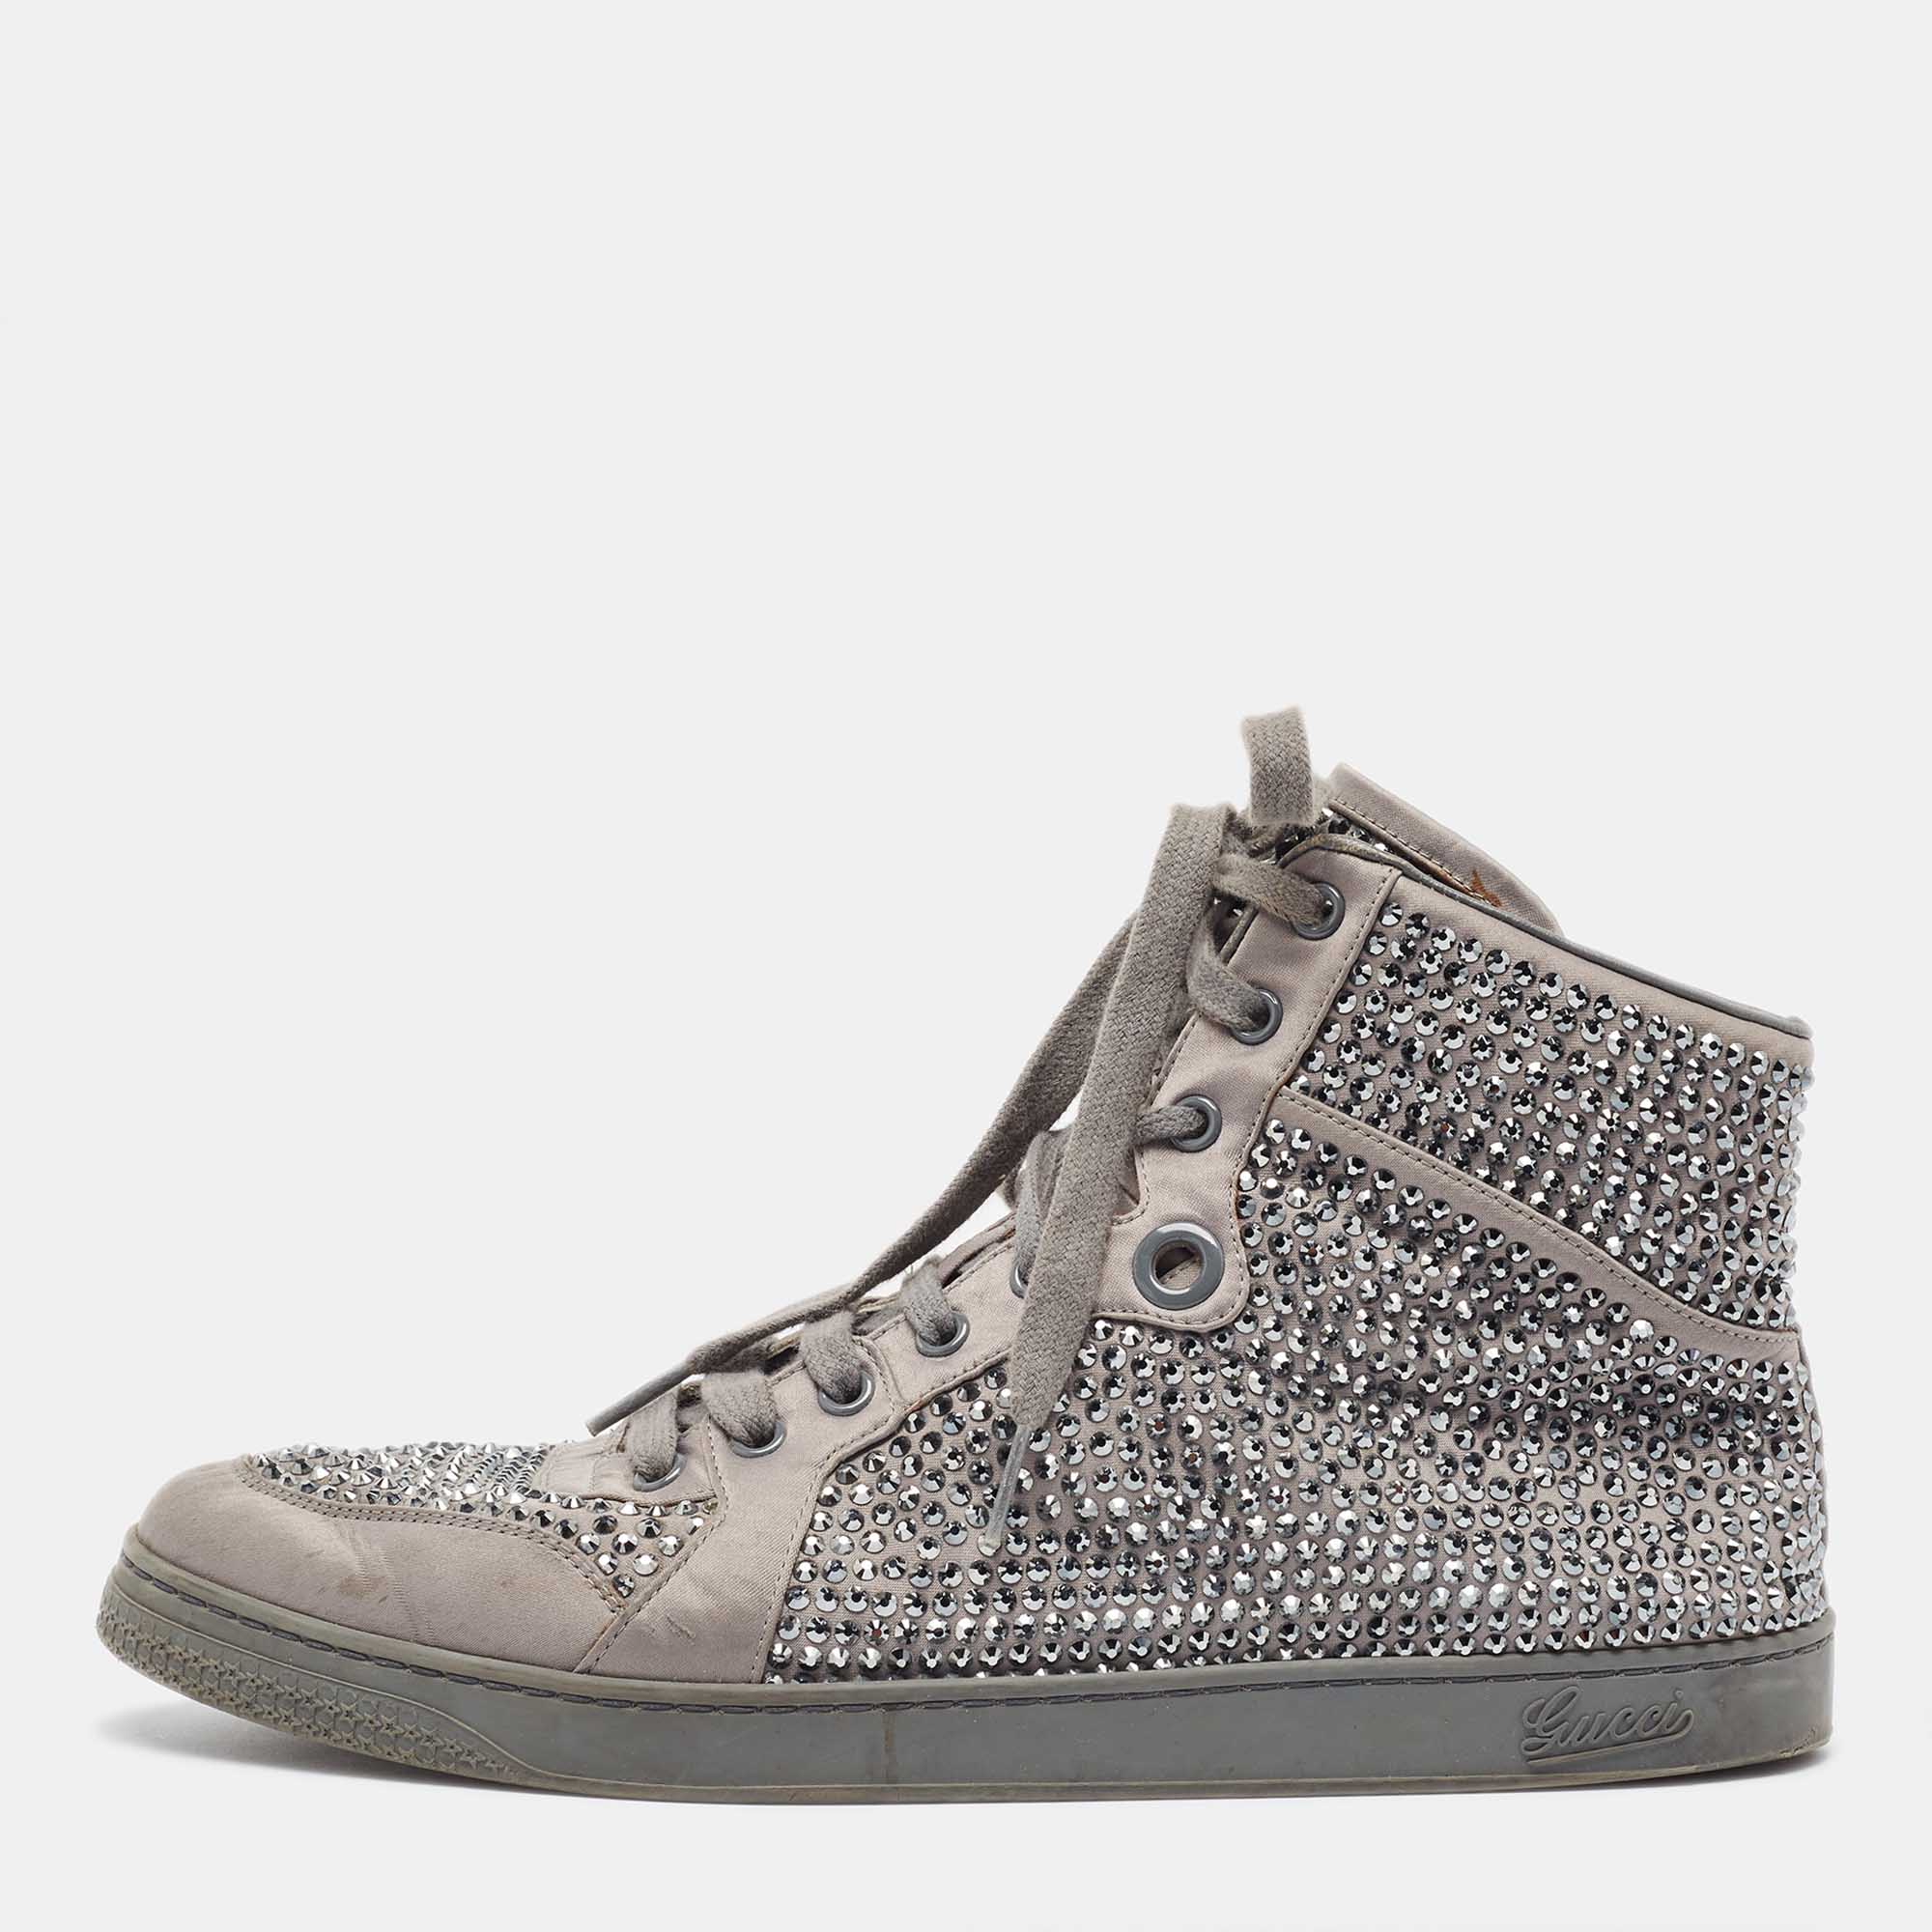 Pre-owned Gucci Grey Satin Crystal Embellished Coda High Top Trainers Size 42